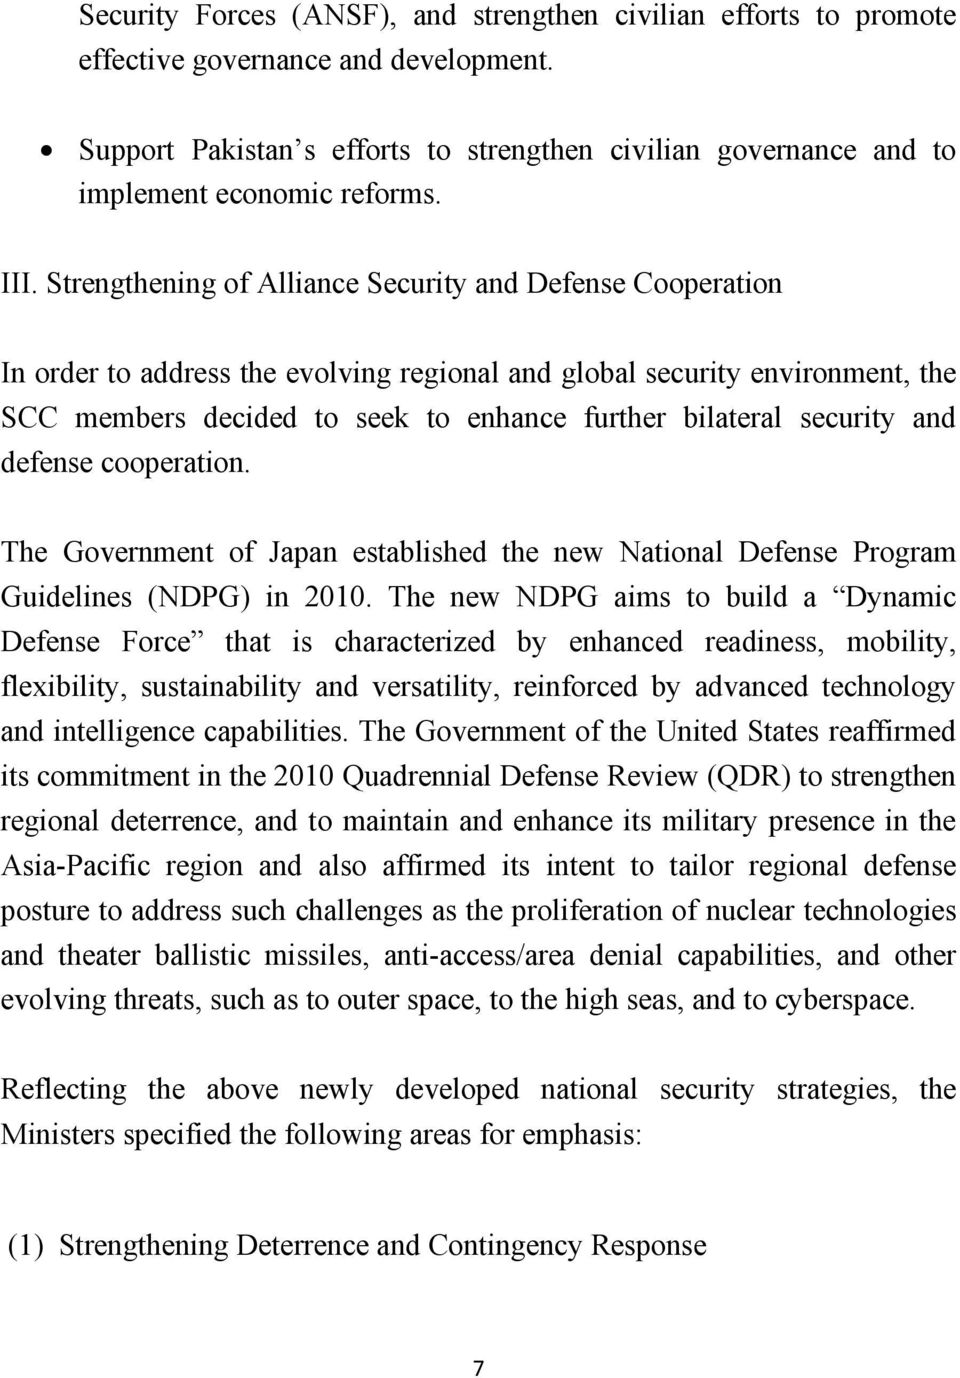 security and defense cooperation. The Government of Japan established the new National Defense Program Guidelines (NDPG) in 2010.